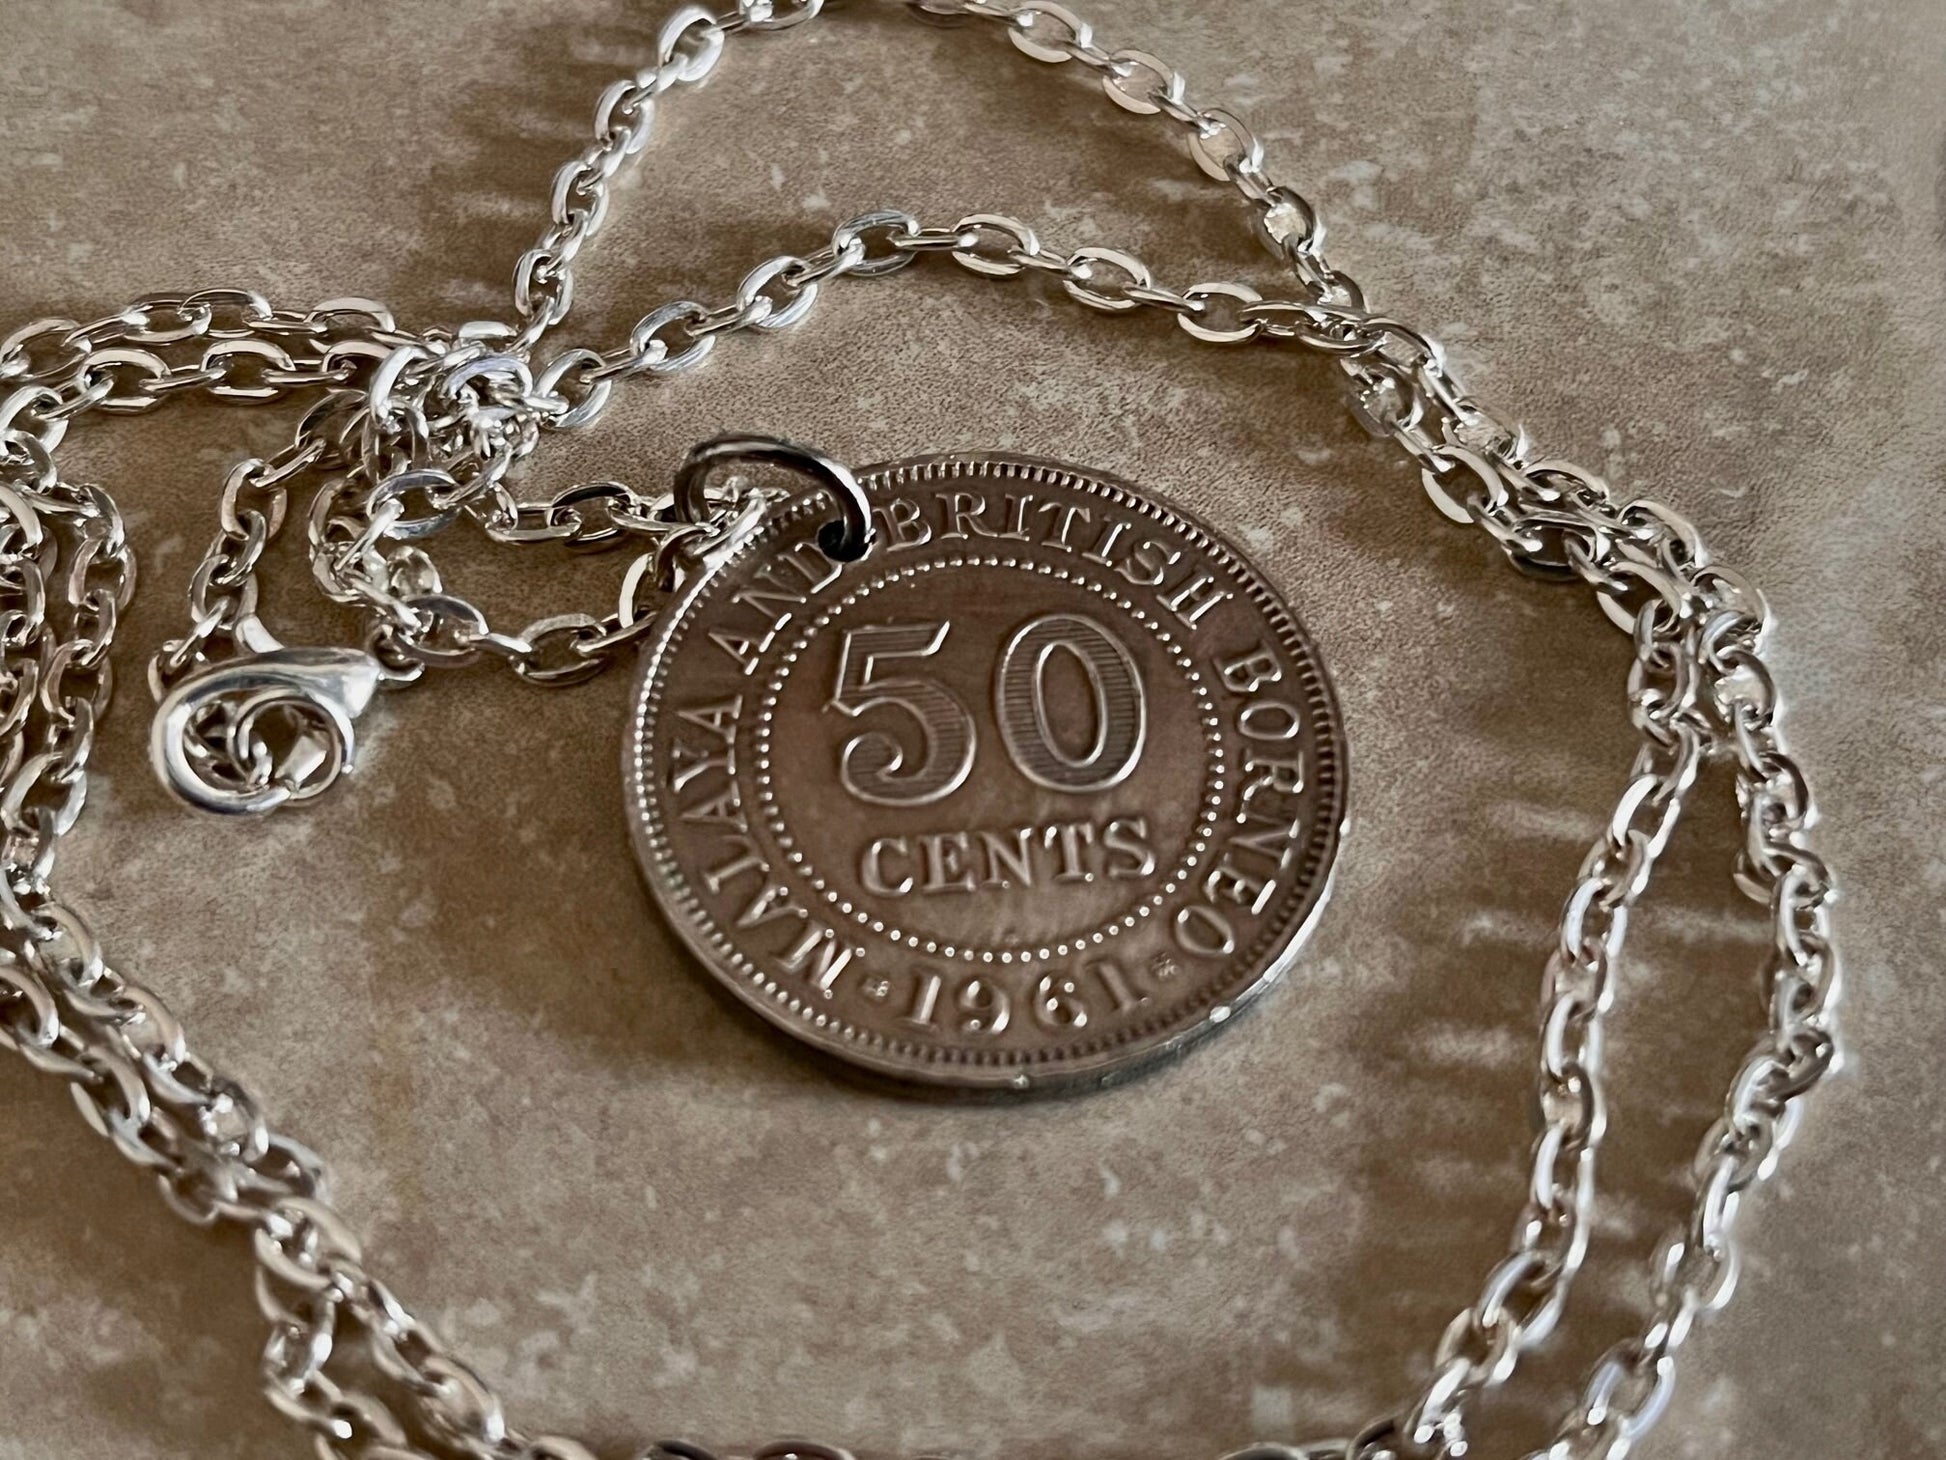 Malaya & British Borneo Coin Necklace 50 Cents Pendant Personal Vintage Handmade Jewelry Gift Friend Charm For Him Her World Coin Collector